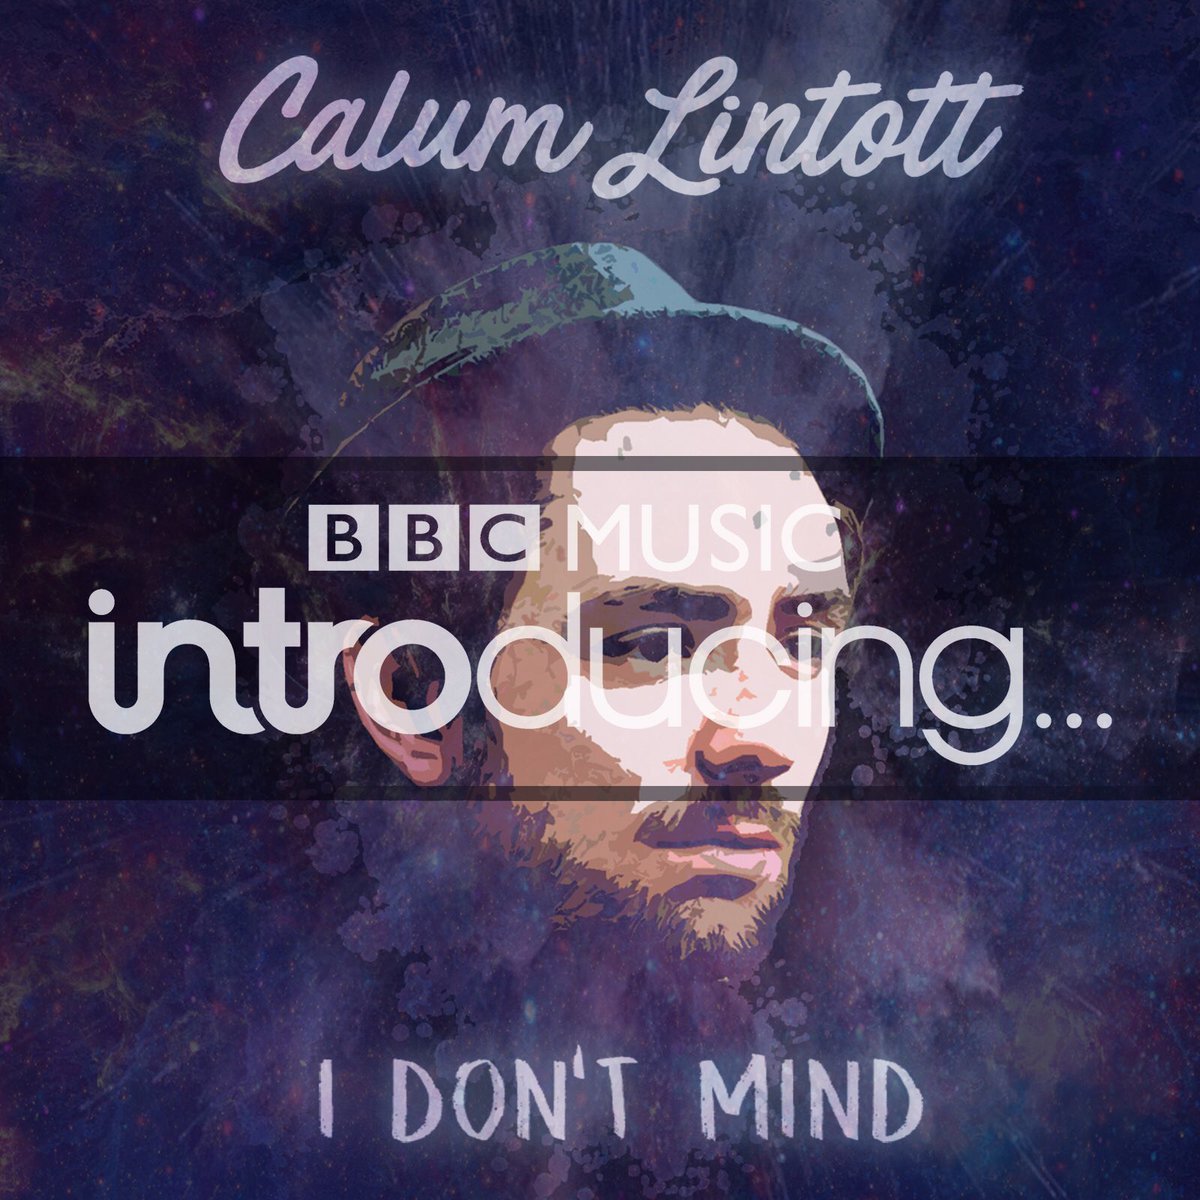 ‘I Don’t Mind’ will recieve its first radio play today on @BBCIntroSolent 

Tune in between 8-9! 

#bbcintroducing #idontmind #newmusic #bbcsolent